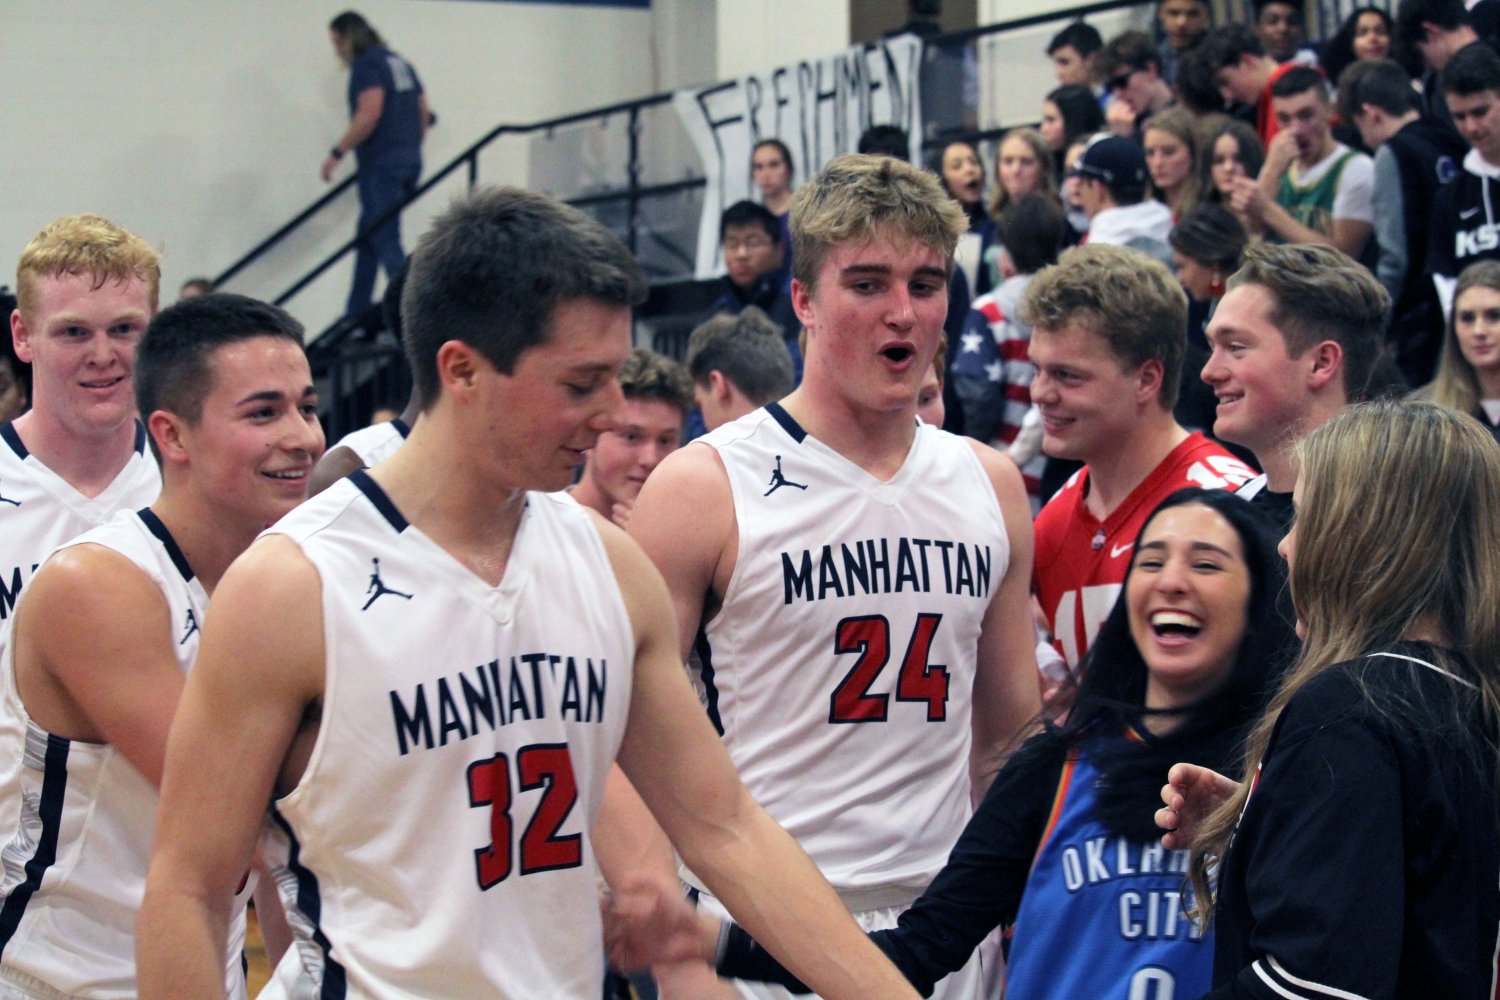 Sweet Success. The MHS Basketball team laughs with friends from the crowd.